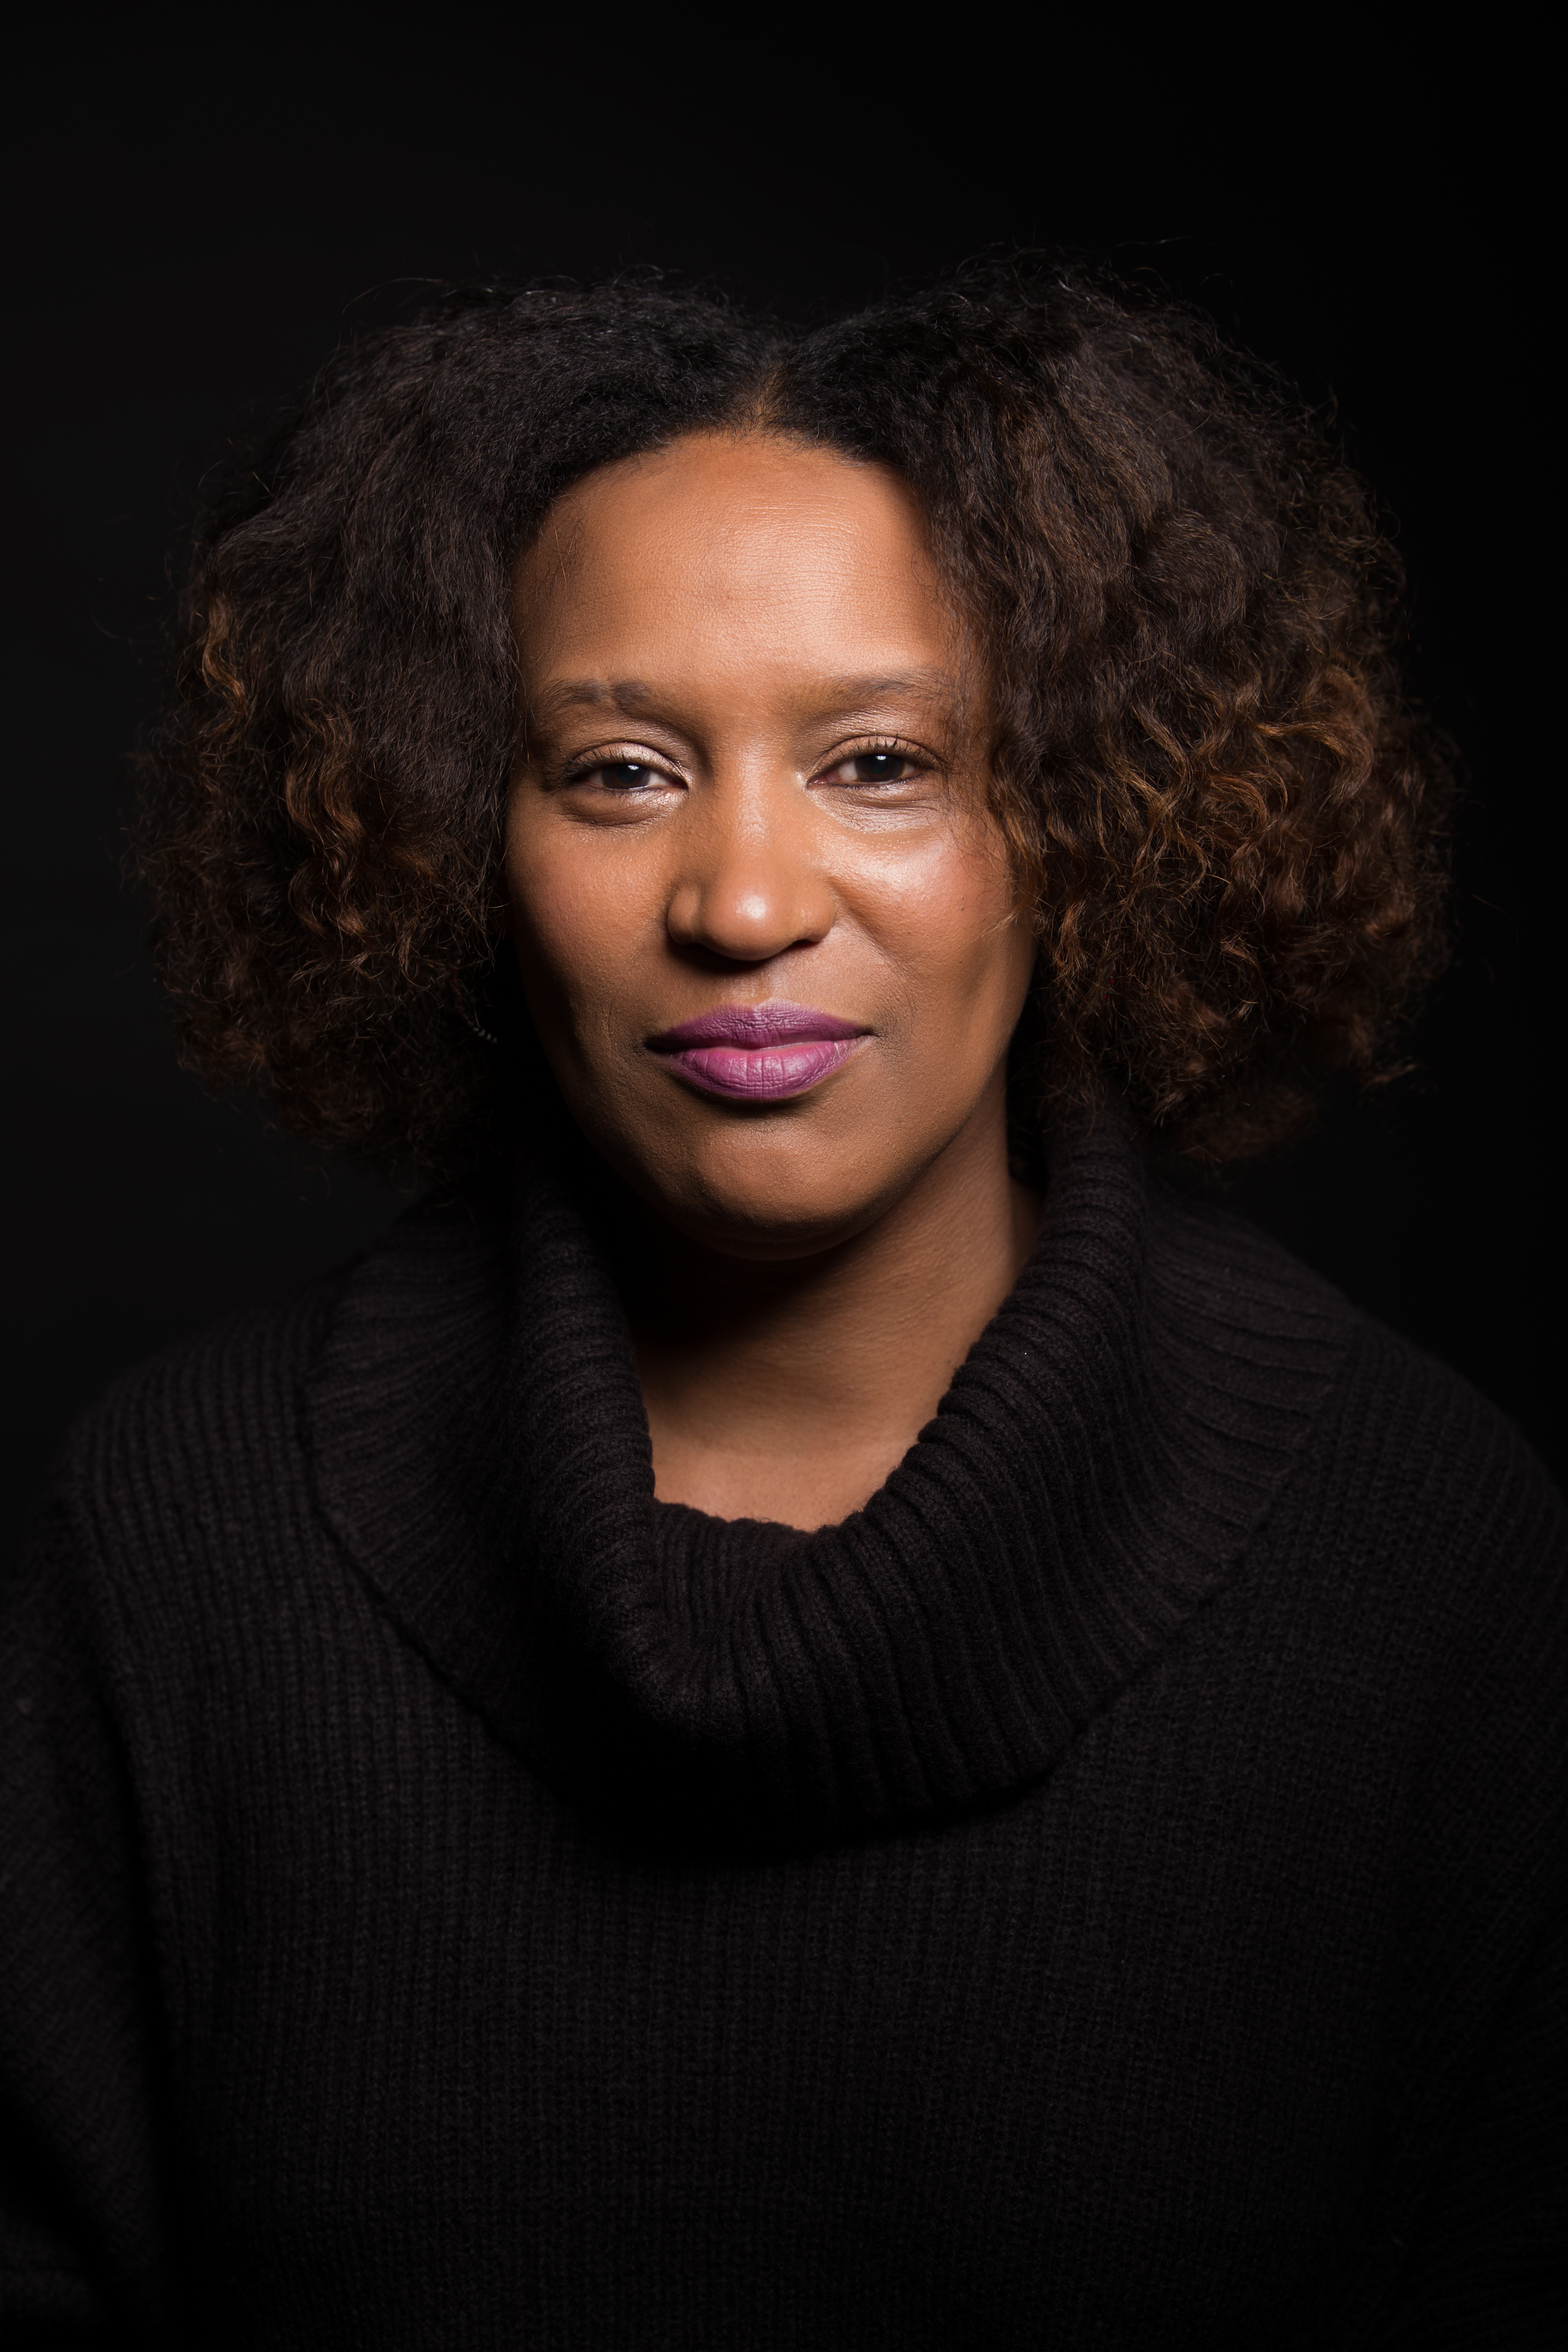 Head shot of Vivian Anderson | A Black woman wearing light purple lipstick and a black turtleneck sweater against a dark background.